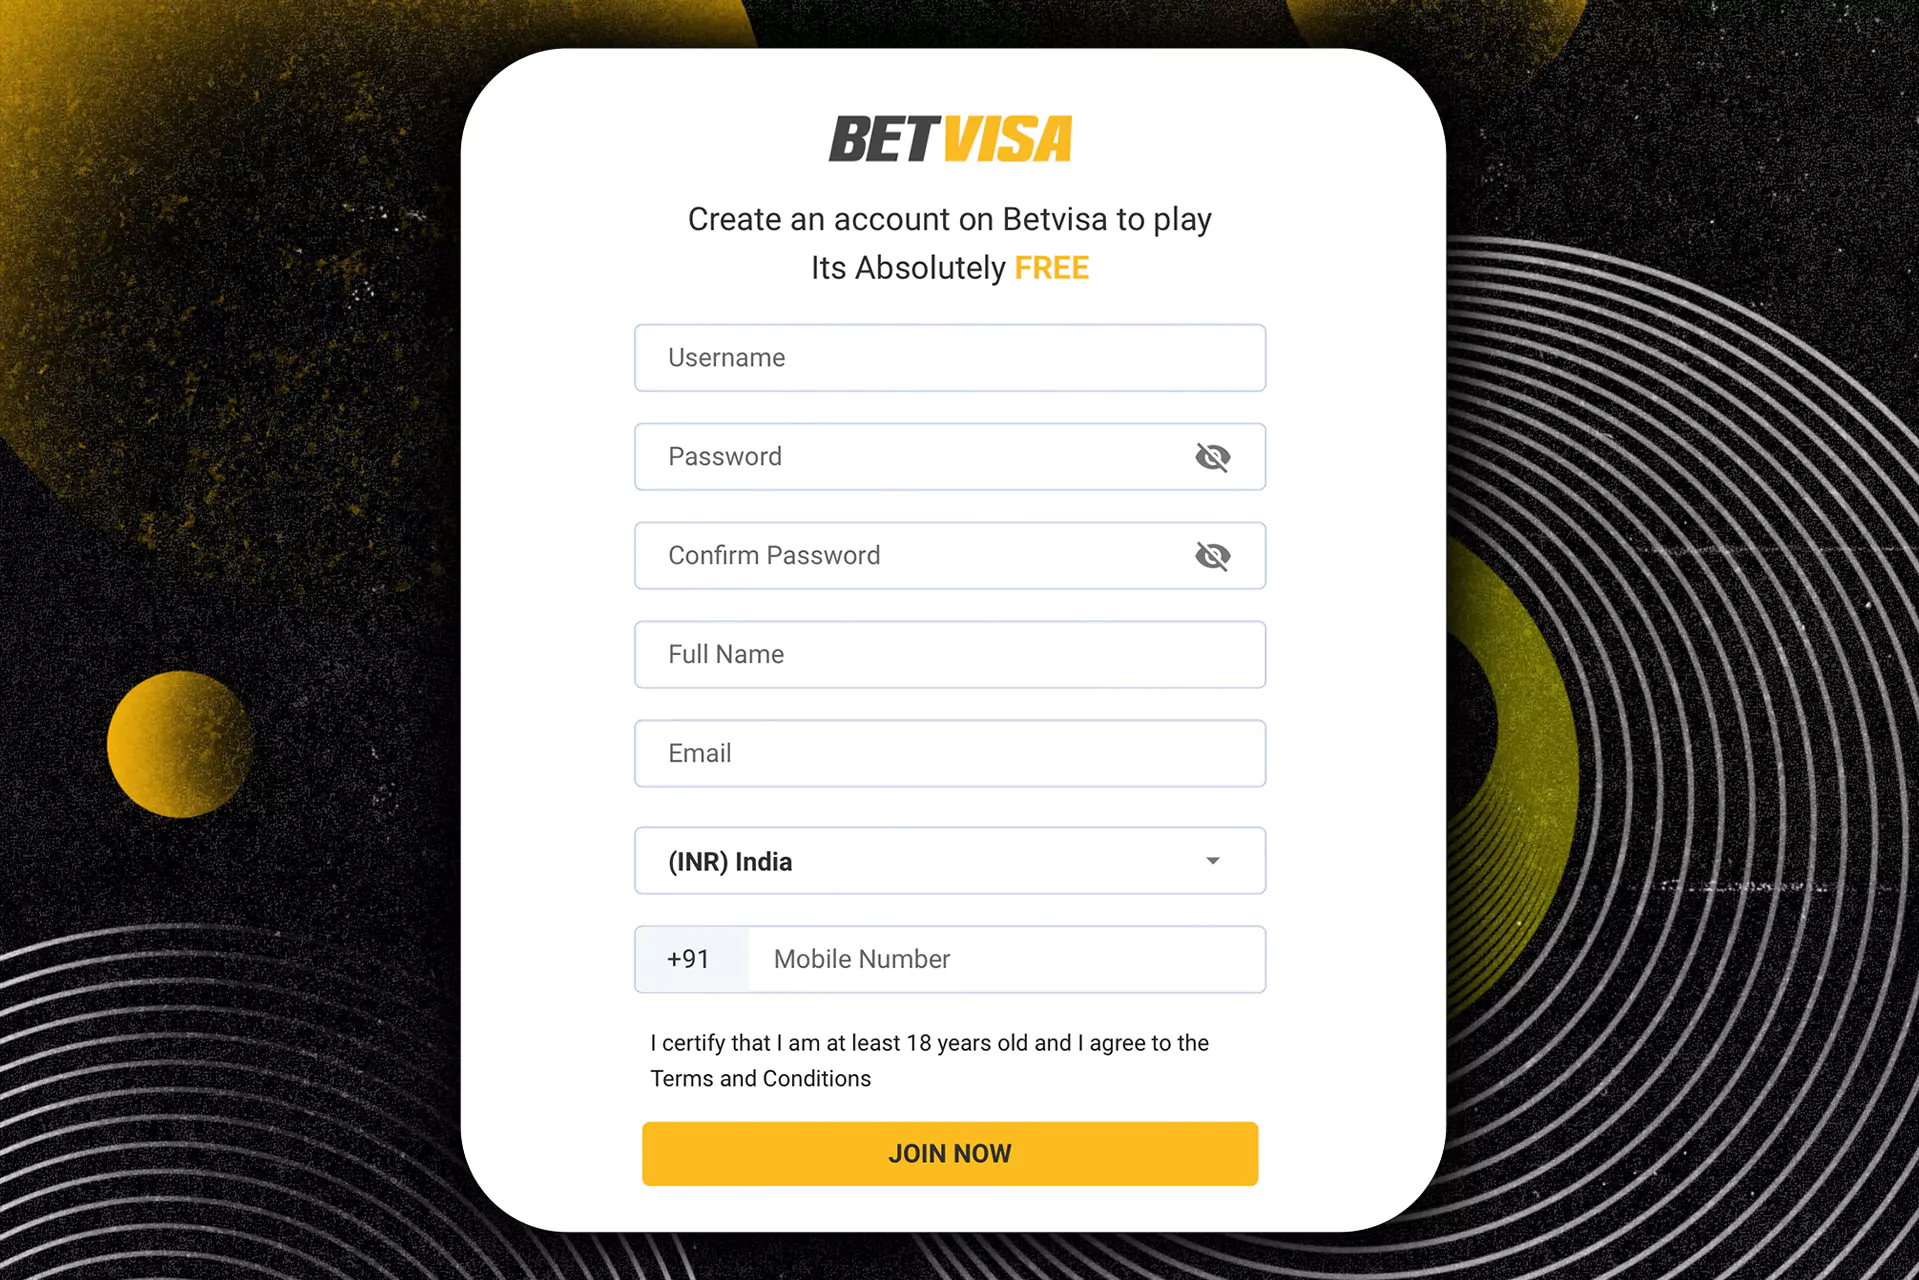 Create the BetVisa account and start betting and playinf casino games.